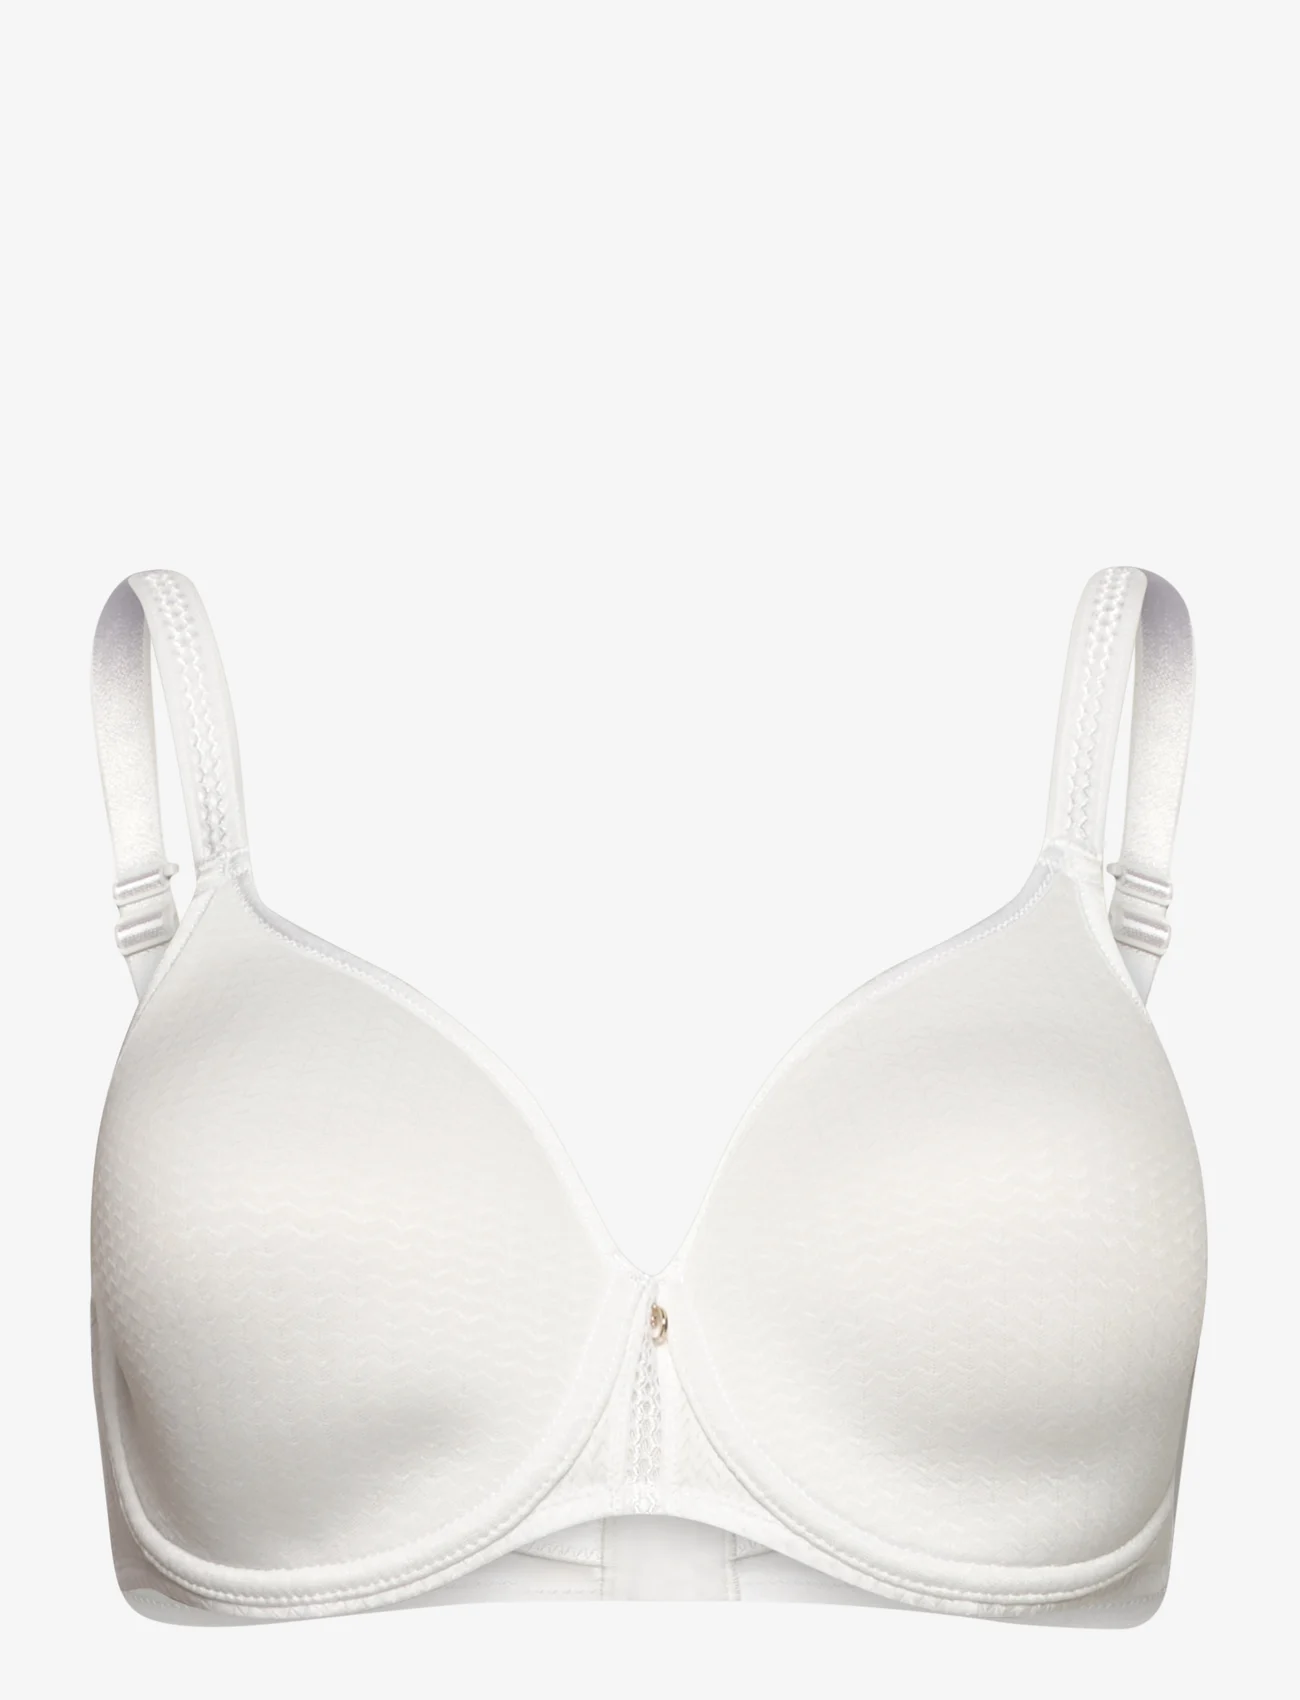 CHANTELLE - Chic Essential Covering spacer bra - soutiens-gorge emboîtant - white - 0